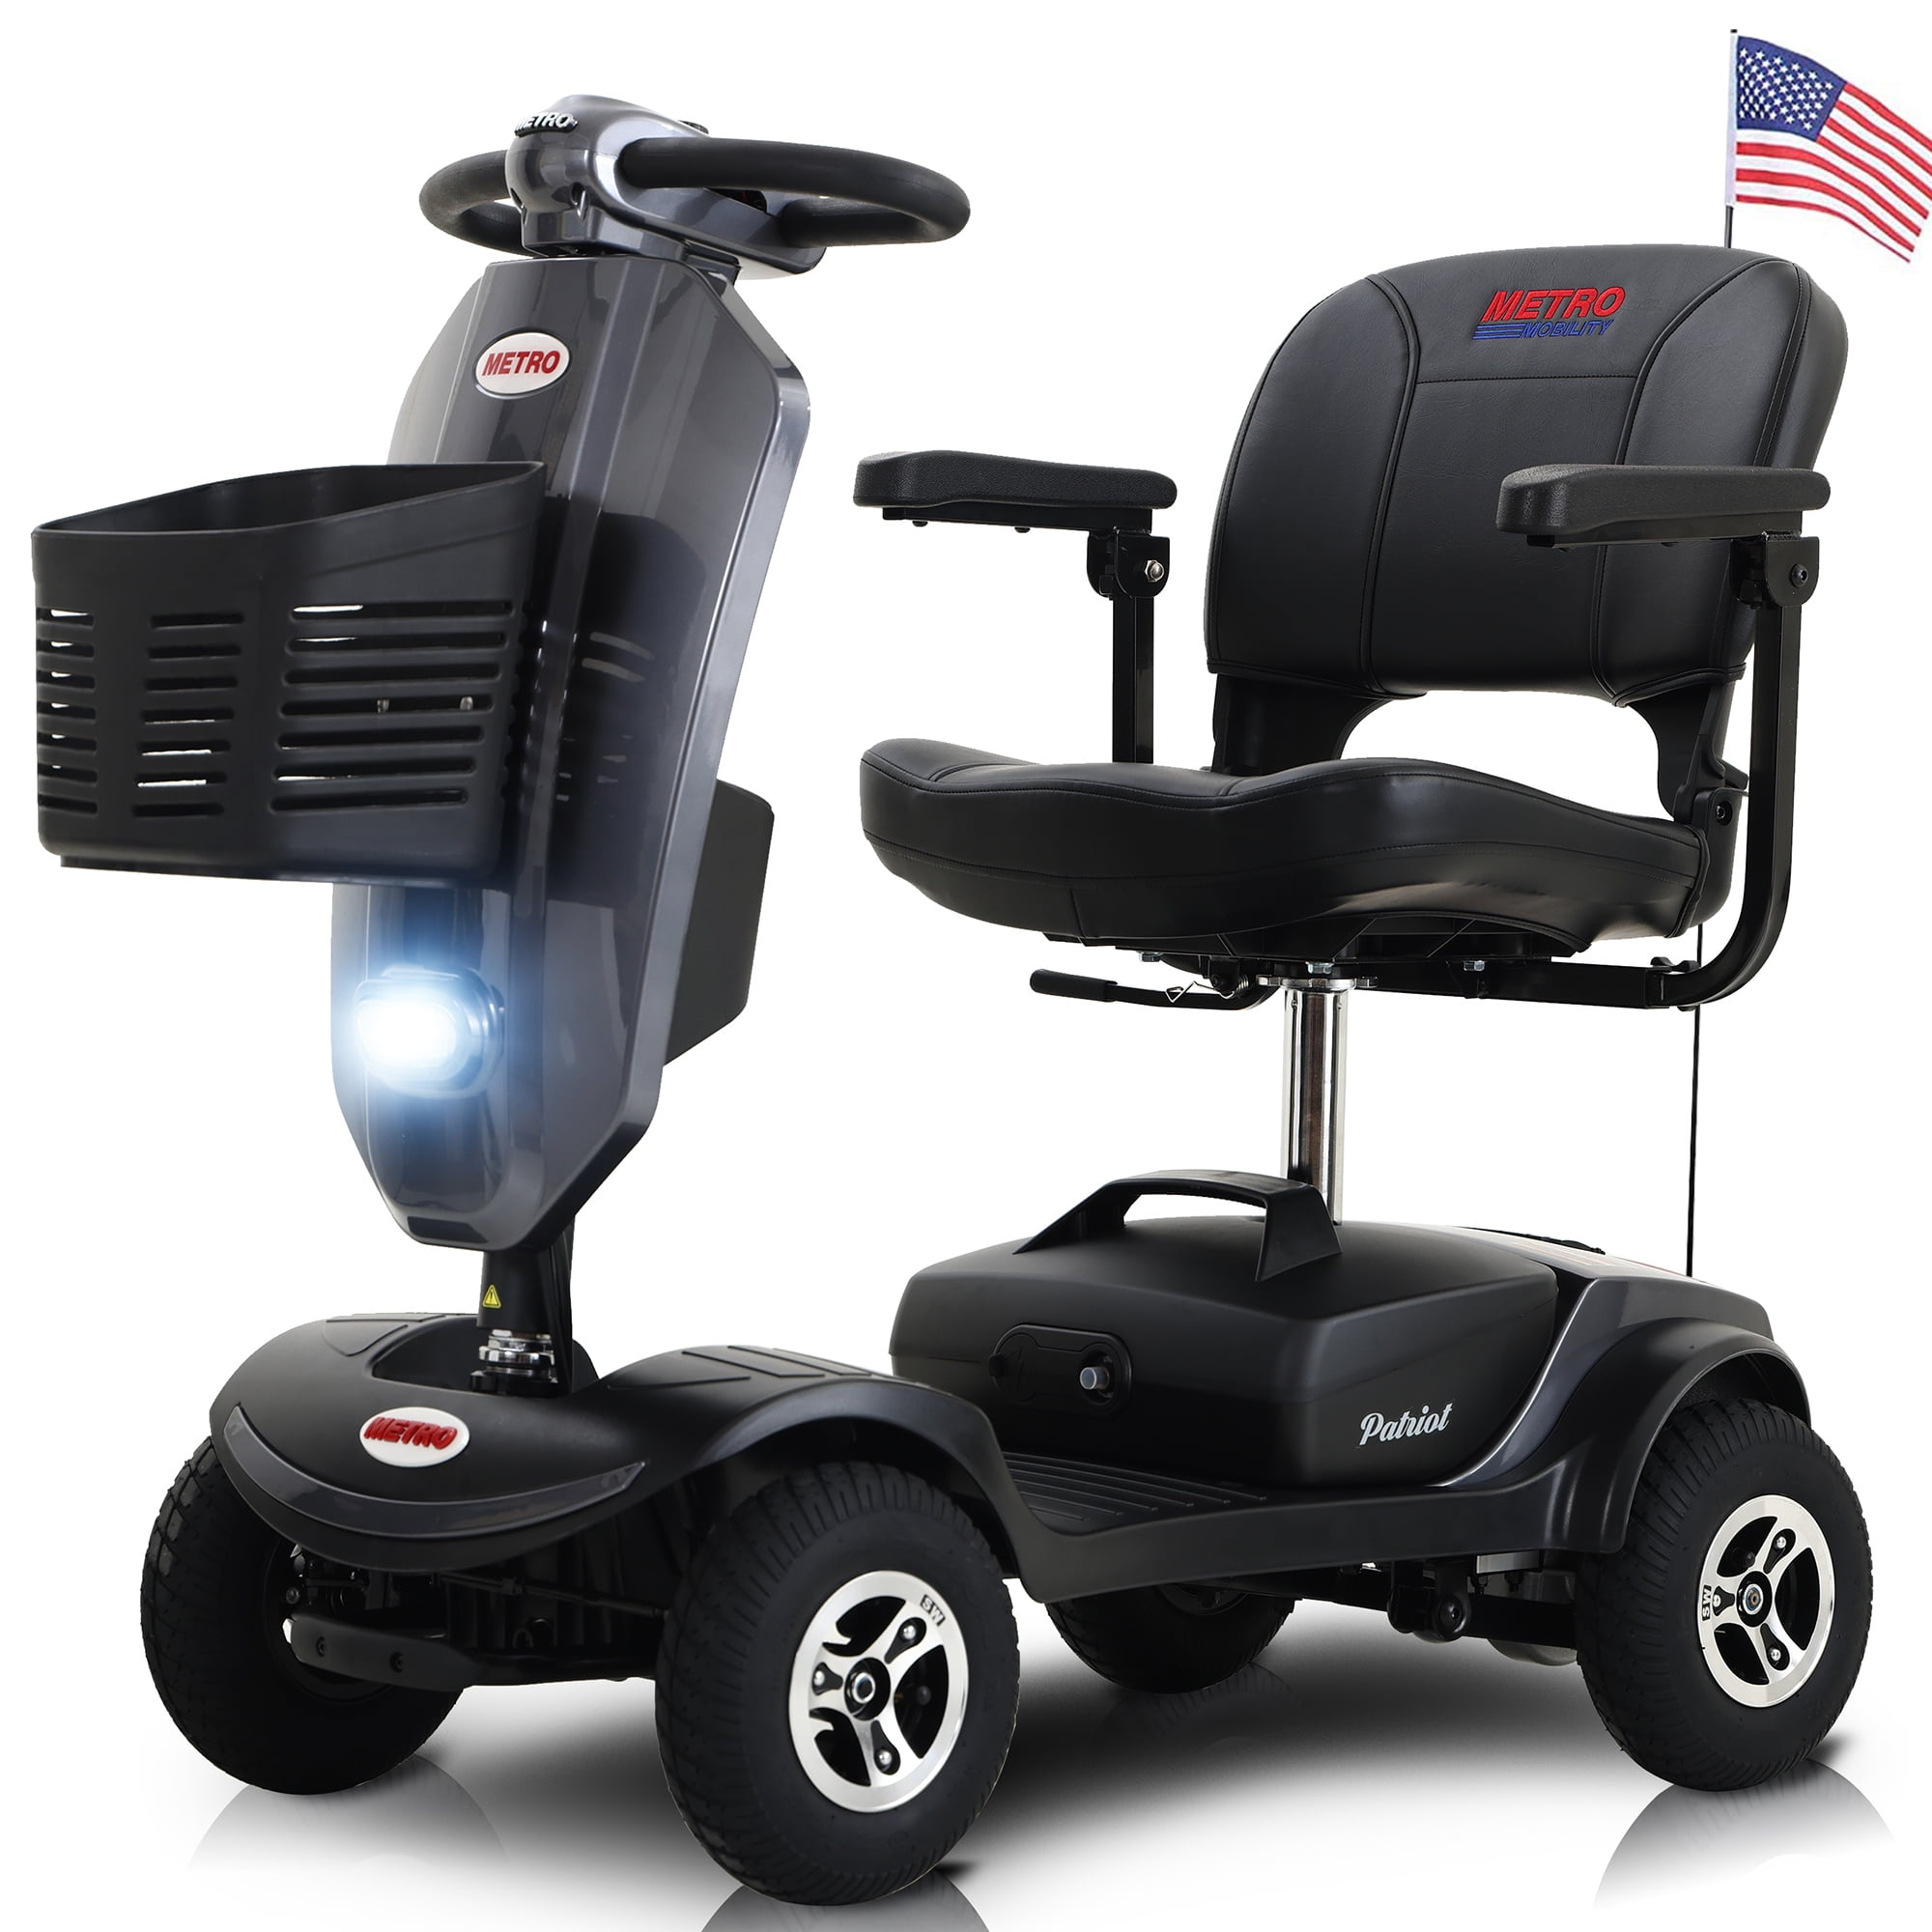 Segmart Mobility for Adults & Outdoor Anti-Tip 4 Electric Scooter with Windshield, Headlights & LED Light, Cup Holder, USB Charging Port, Gift Flag, 300lbs, Grey - Walmart.com